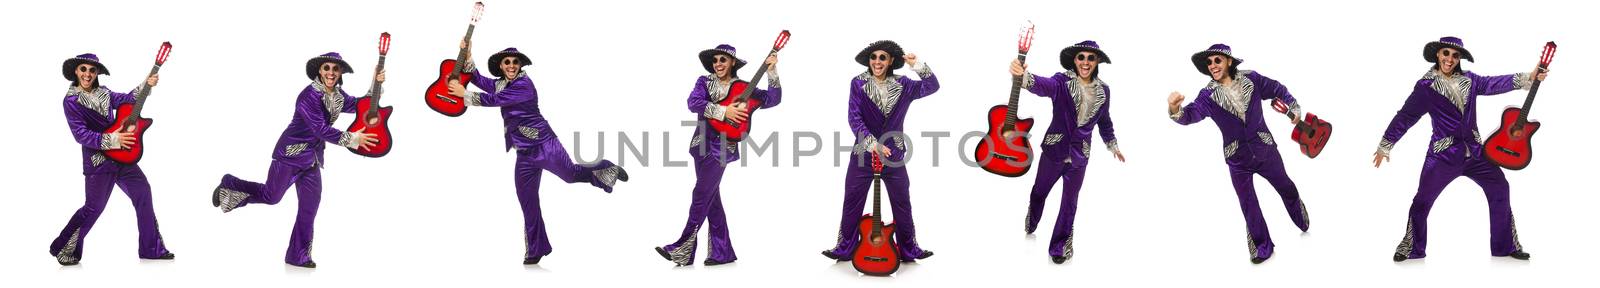 Man in funny clothing holding guitar isolated on white by Elnur